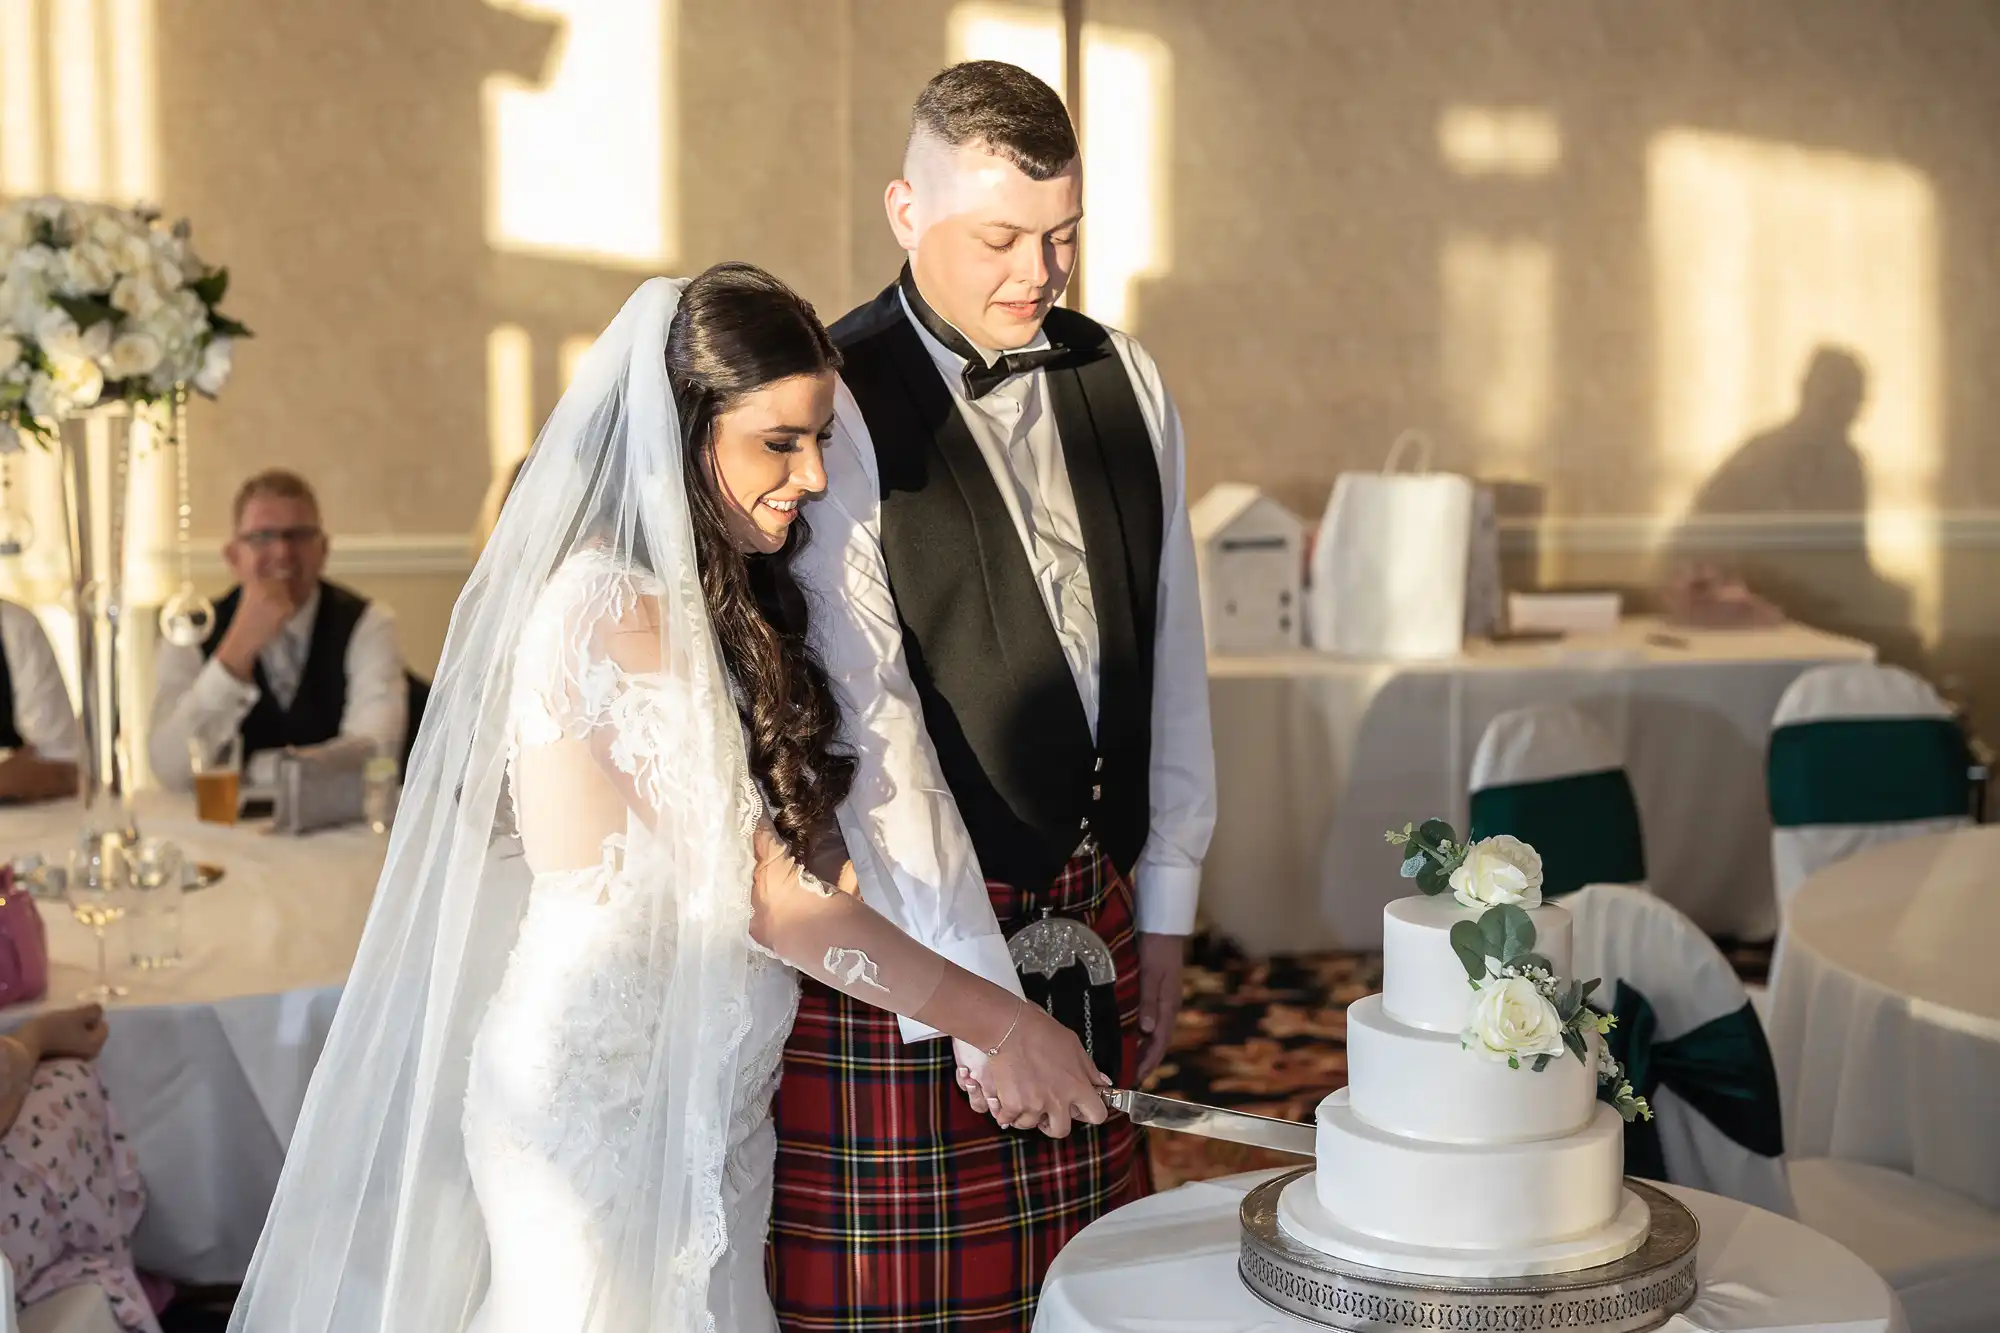 A bride and groom in wedding attire cutting a cake together at their reception.